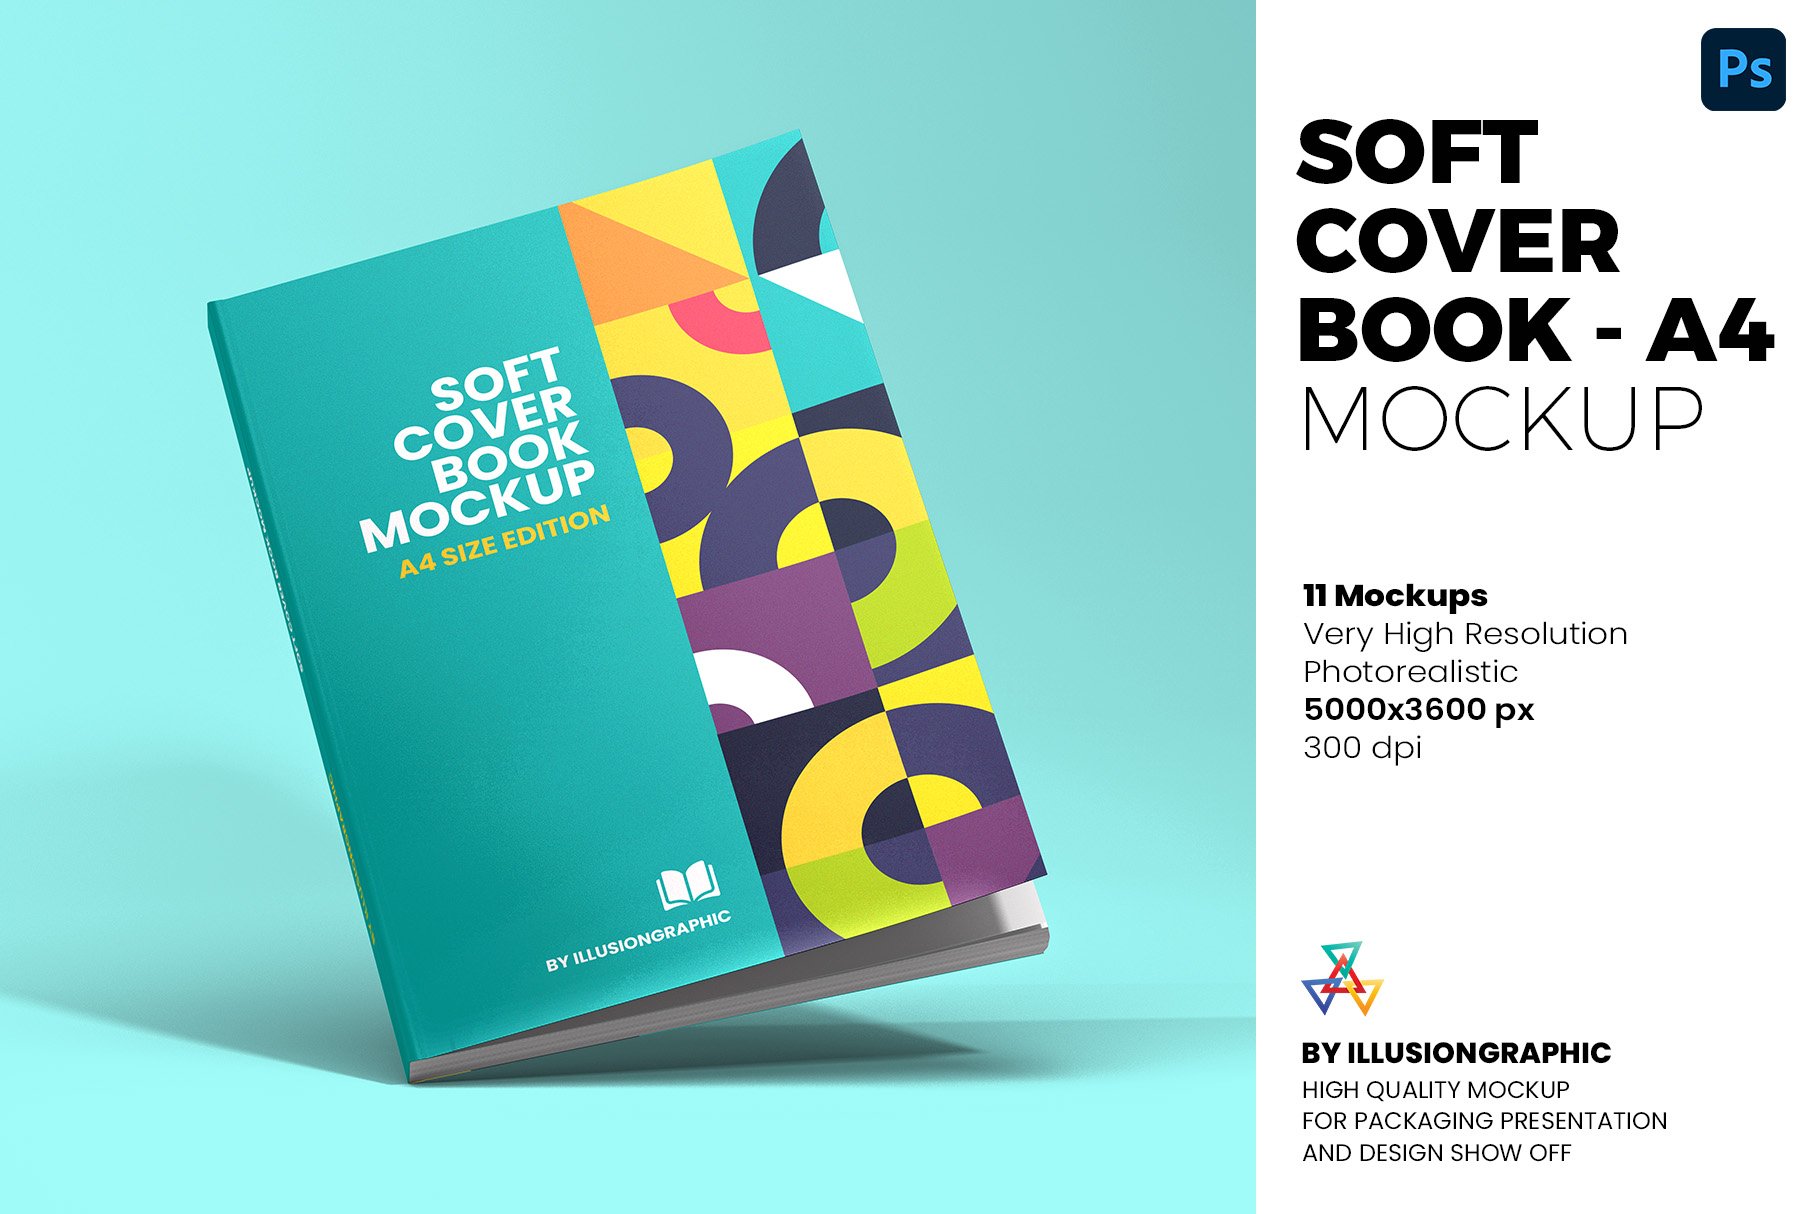 Soft Cover Book Mockup - A4 cover image.